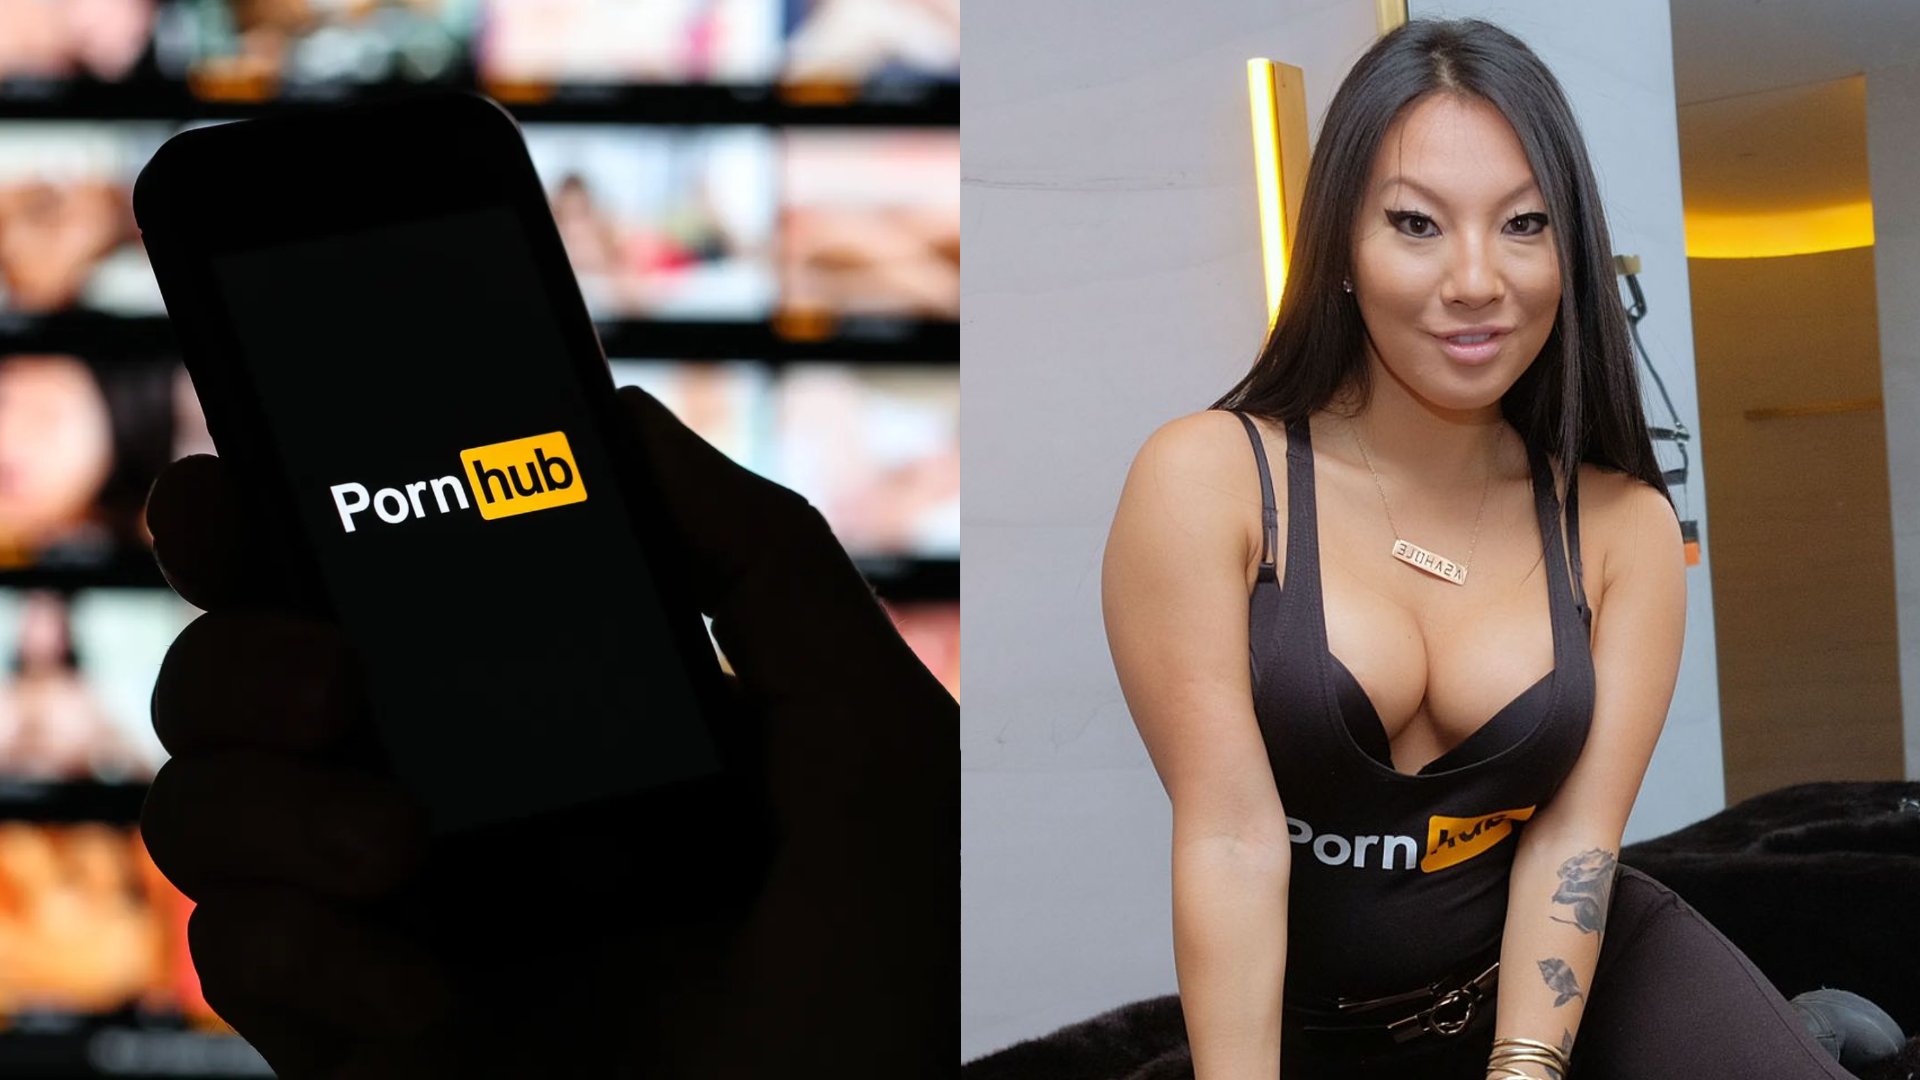 Pronhum - Pornhub Sold To Private Equity Firm For Undisclosed Amount